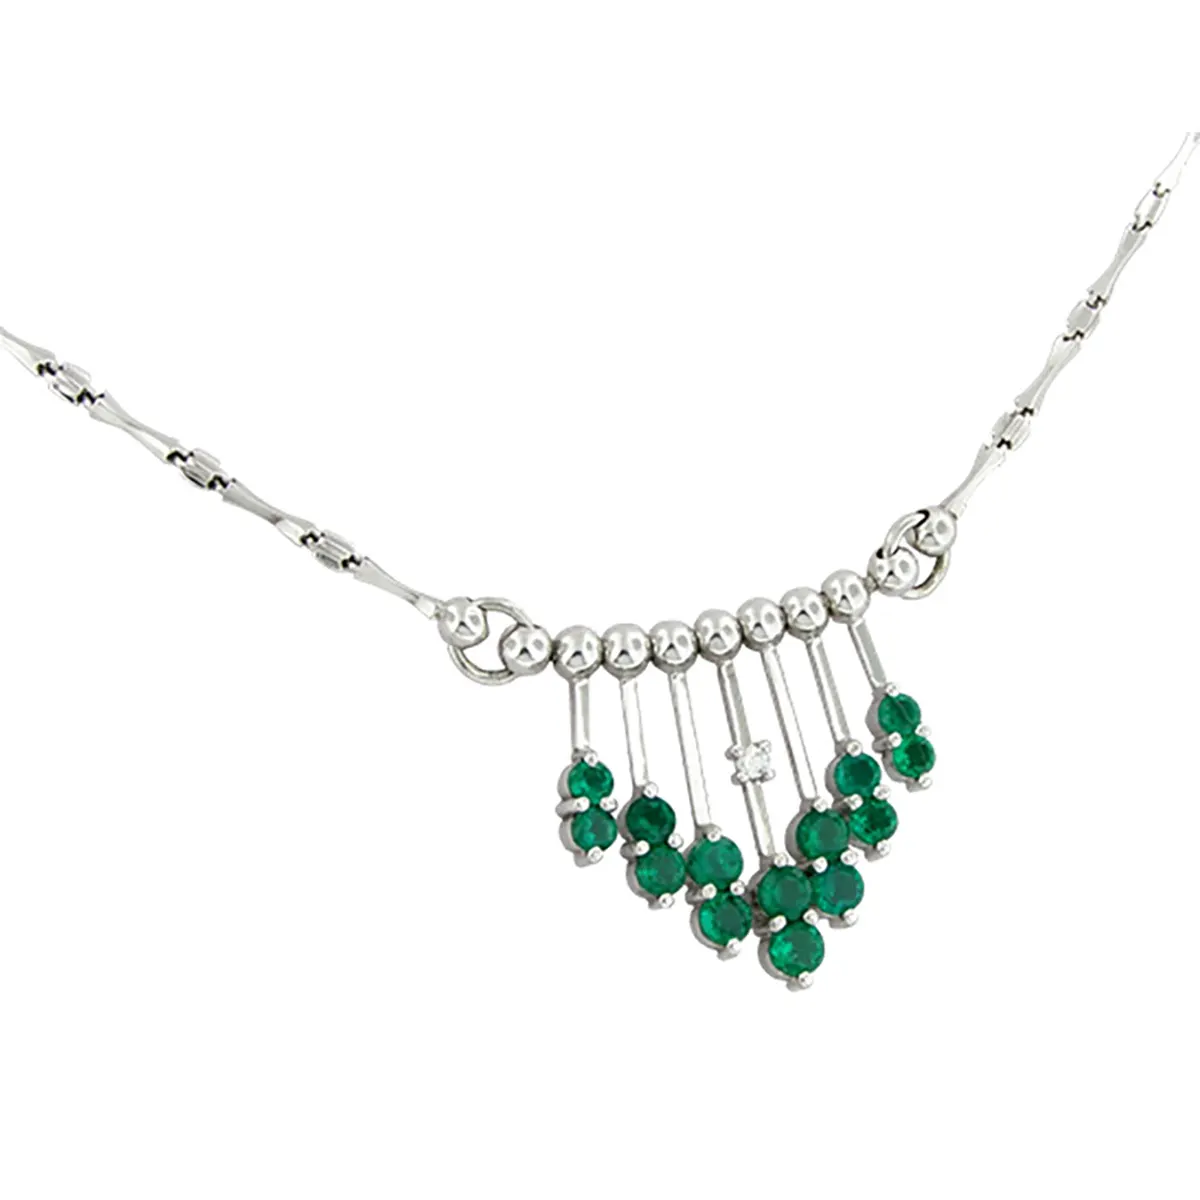 emerald-and-diamond-necklace-in-18k-white-gold-with-round-emeralds-and-diamonds